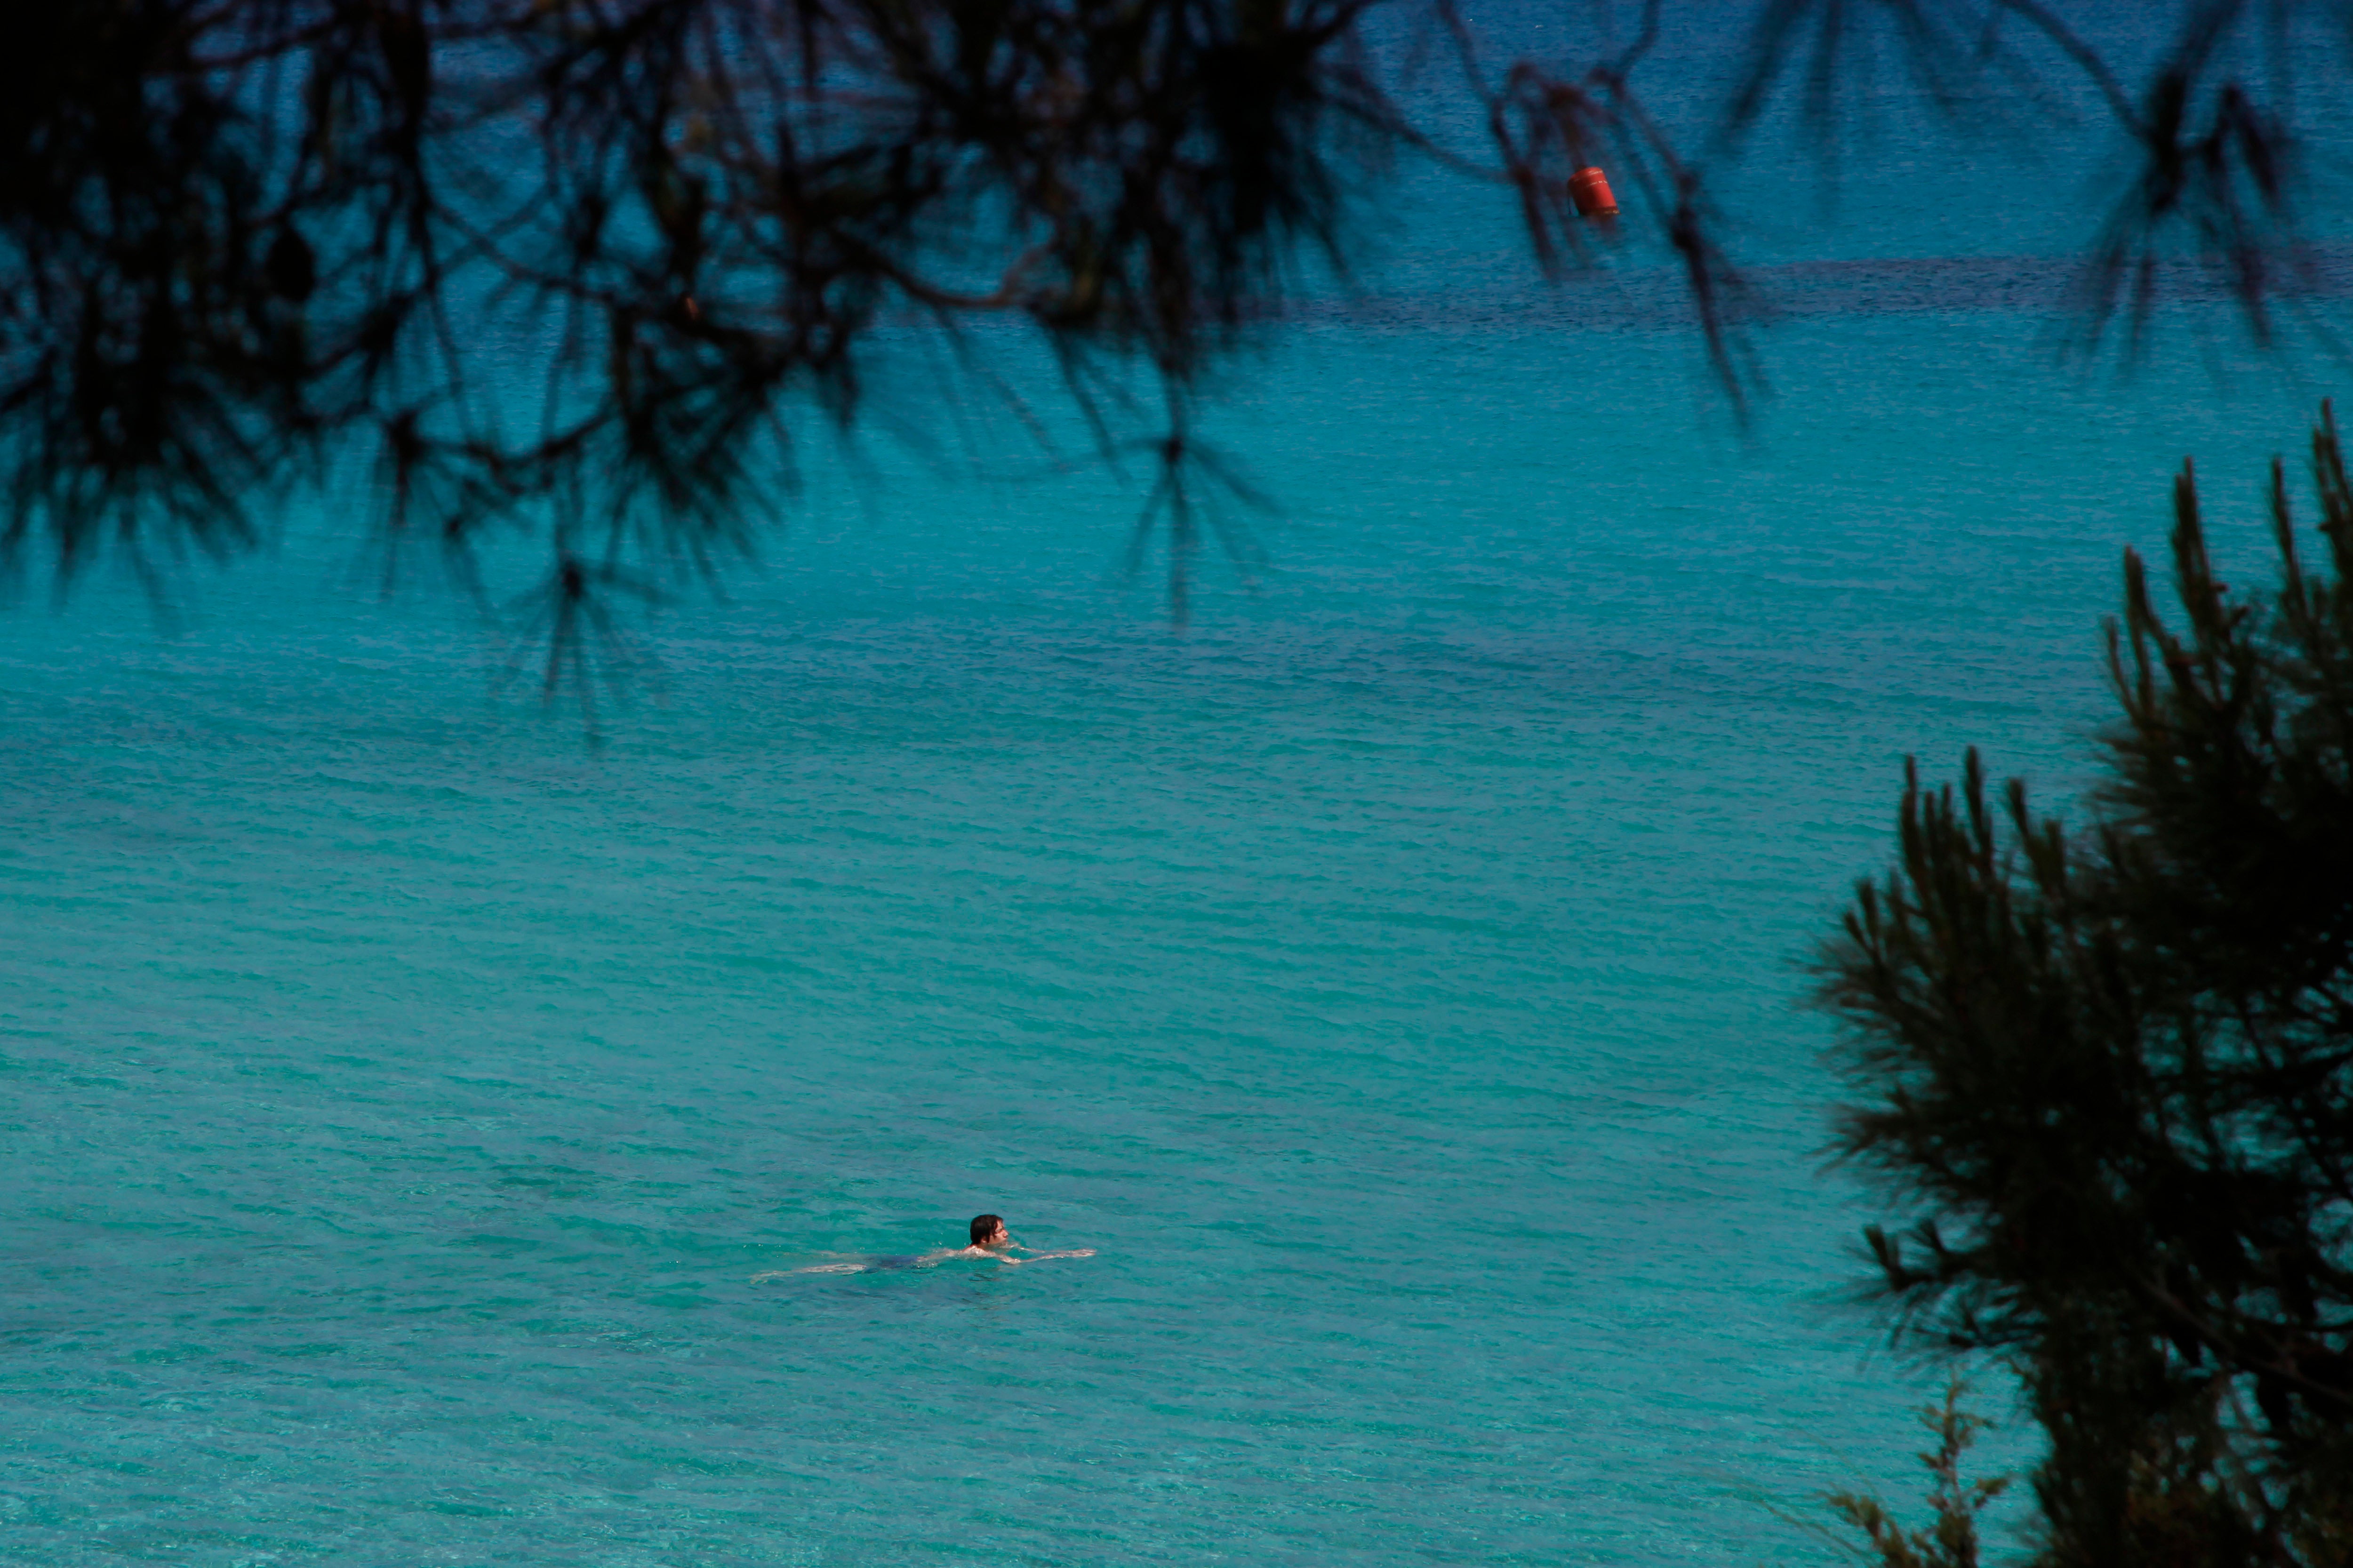 A lone person swims through the clear waters of ‘Konnos’ beach in Ayia Napa, Cyprus. Cyprus government spokesman Kyriakos Koushos said that the Cabinet accepted a recommendation by the minsters of the interior and finance to cancel altogether the ‘golden passport’ programme